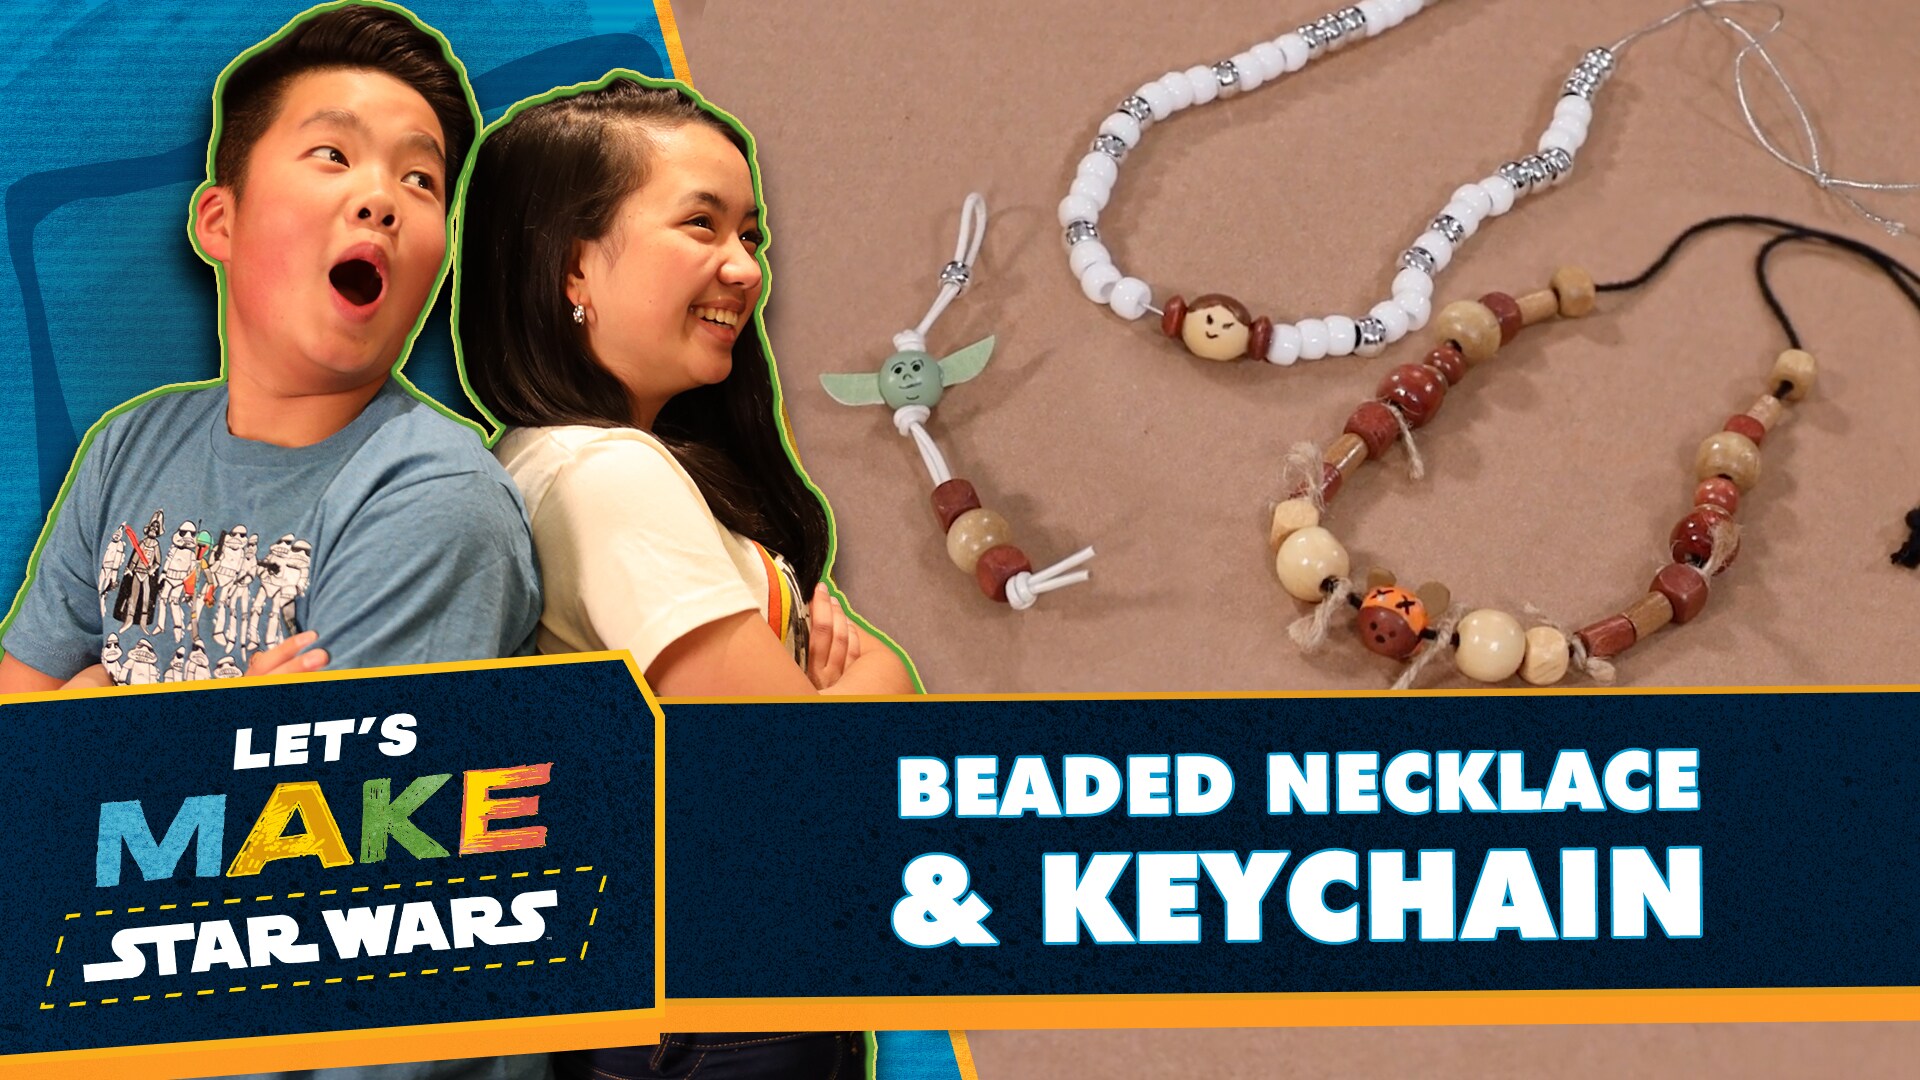 Let's Make Star Wars - How to Make a Beaded Necklace and Keychain